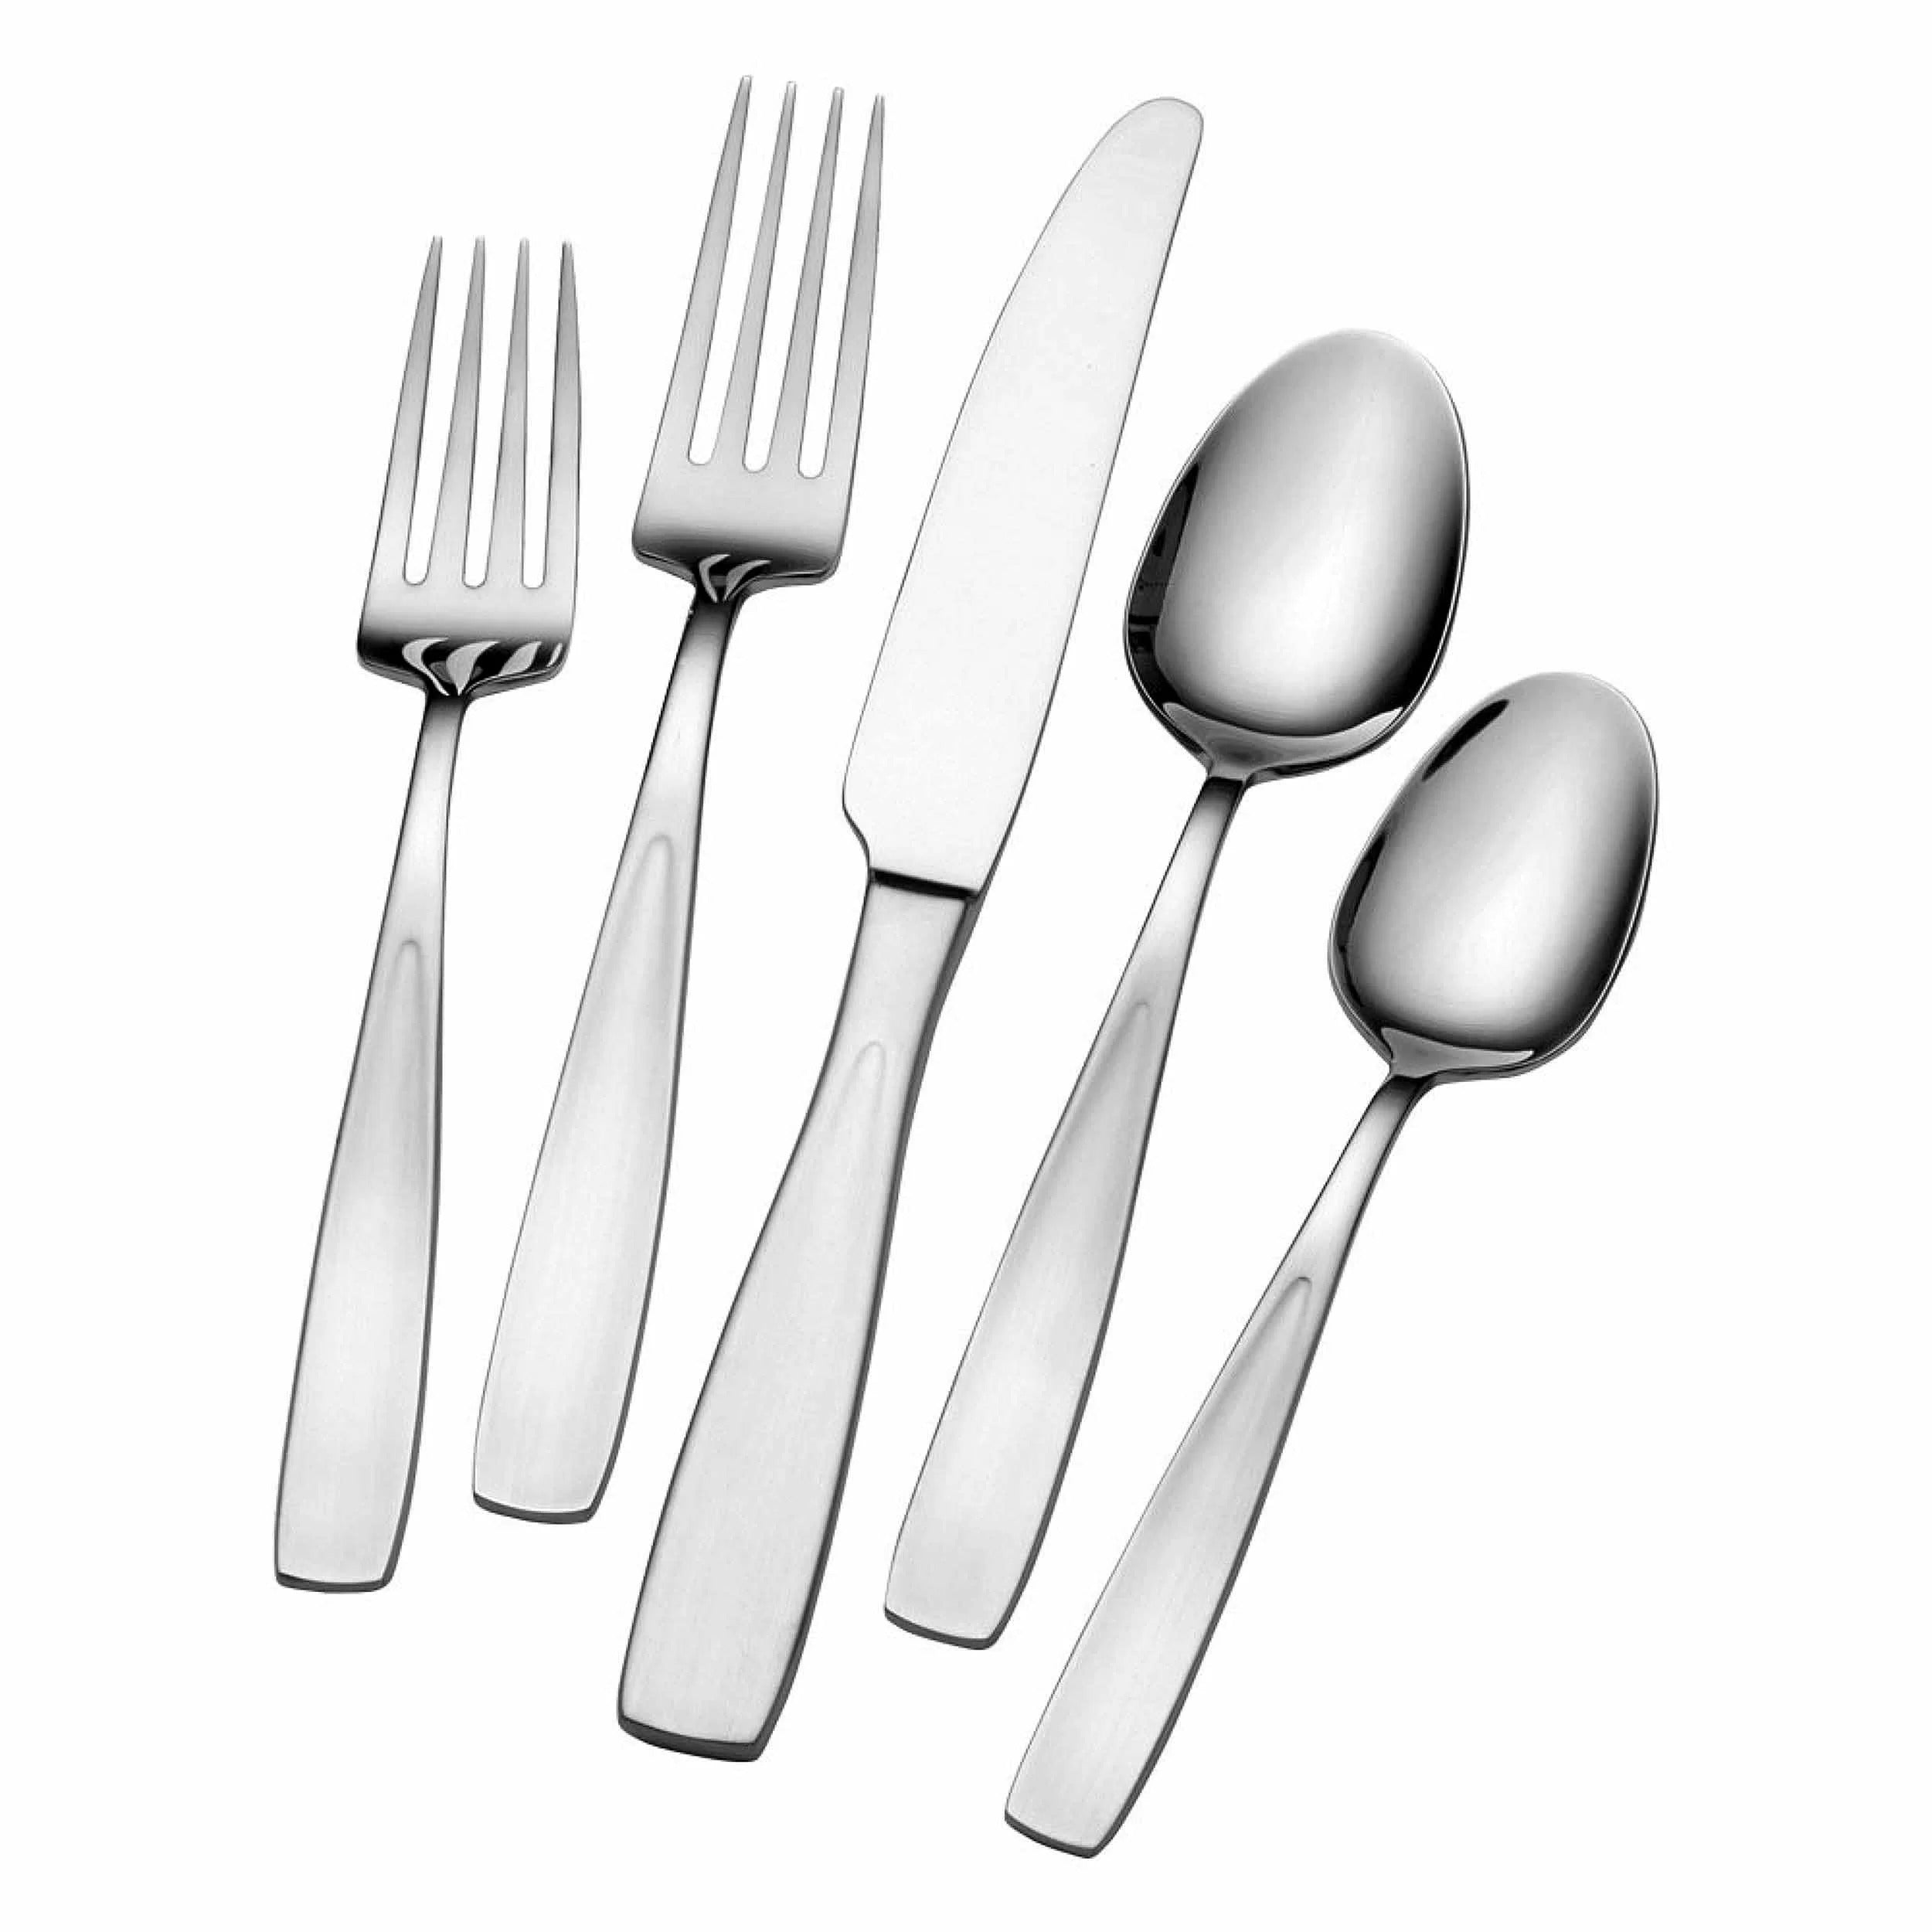 Towle Dario 45 Piece set 18/10 Stainless Steel, Service for 8 plus 5 piece hostess set - Royal Gift